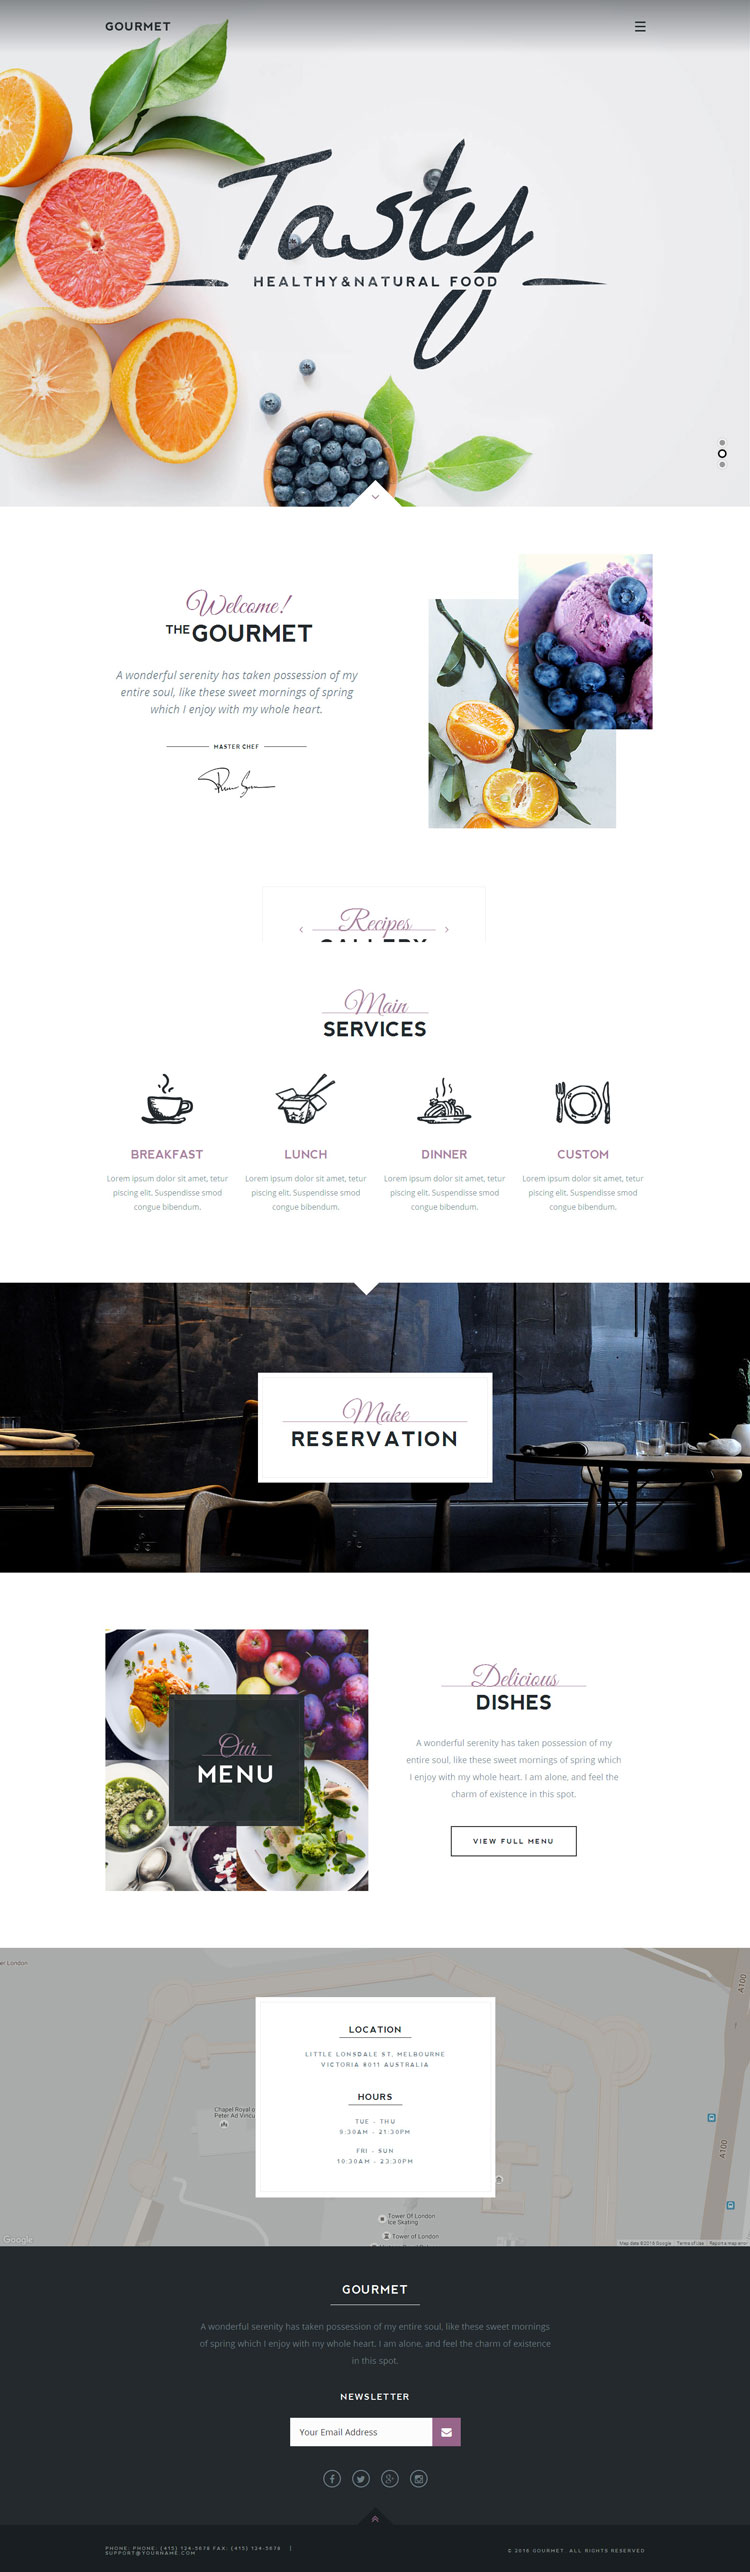 Creative-Newest-Website-Designs-for-Inspiration-002